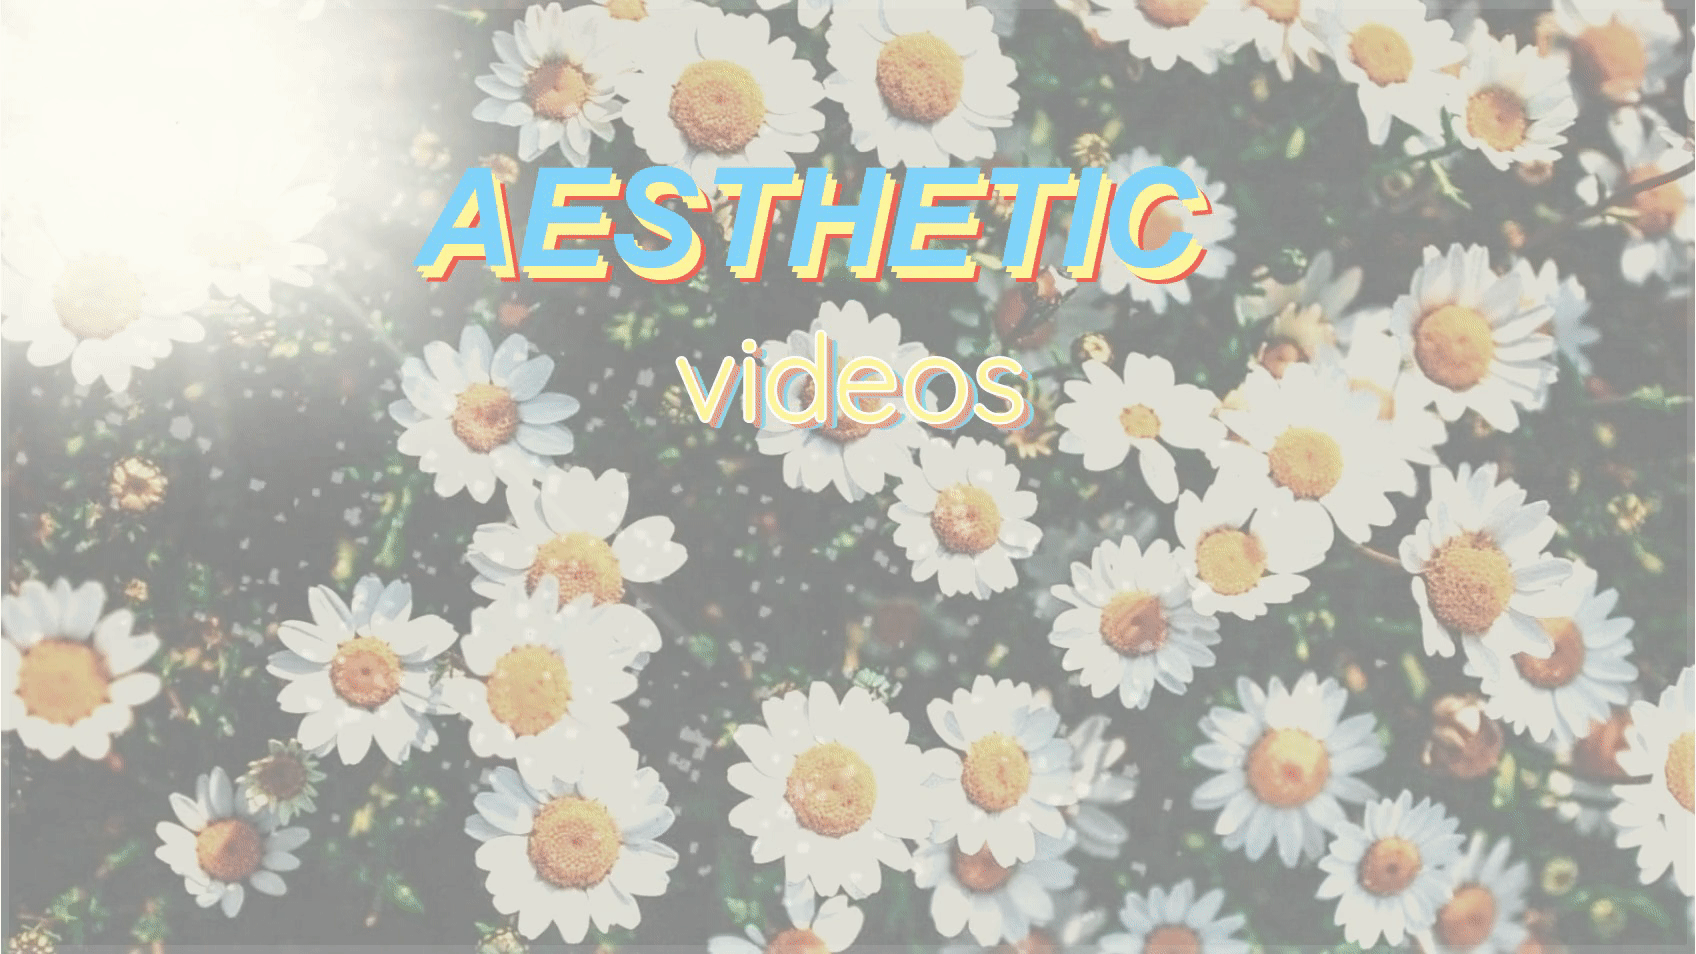 How to Make & Edit Aesthetic Videos